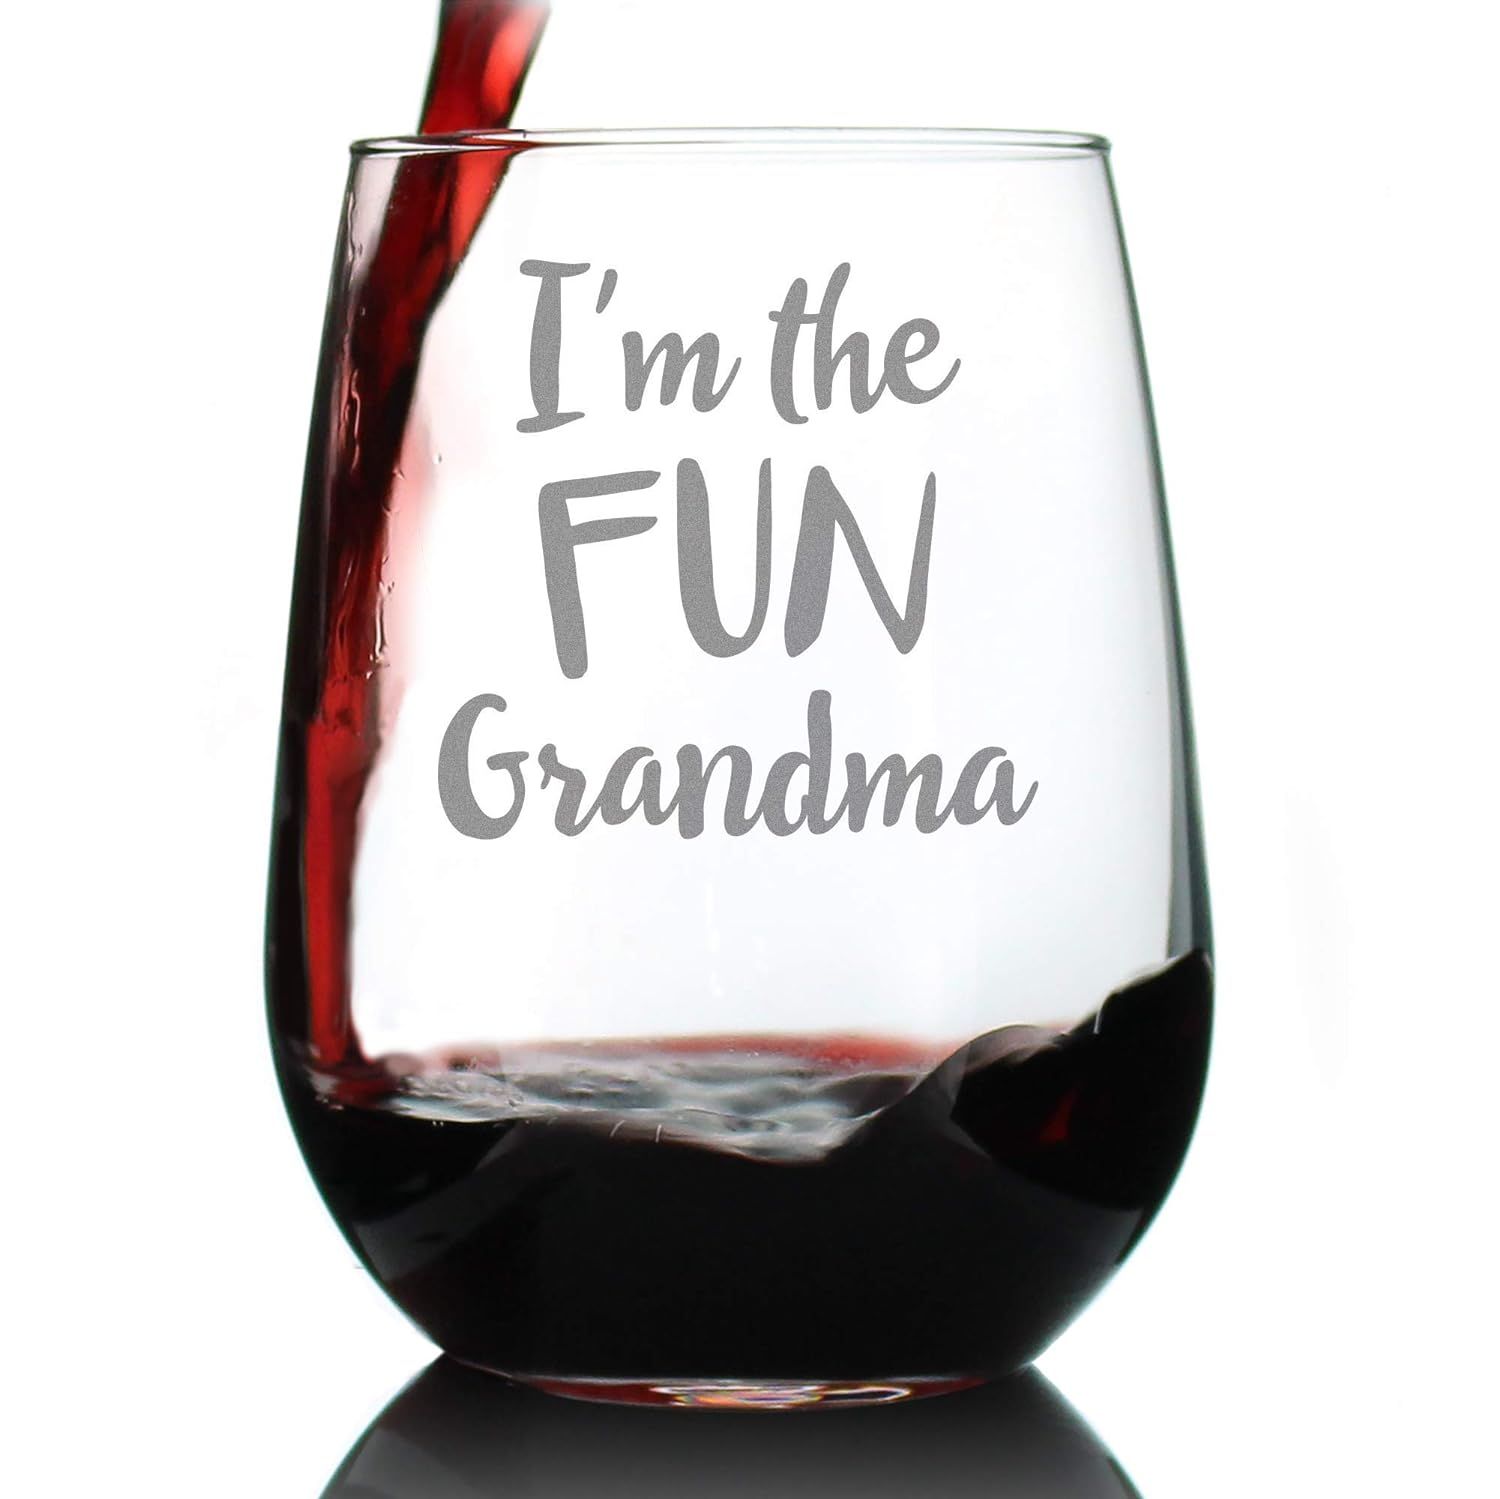 Fun Grandma – Cute Funny Stemless Wine Glass, Large 17 Ounce Size, Etched Sayings, Gift Box | Amazon (US)